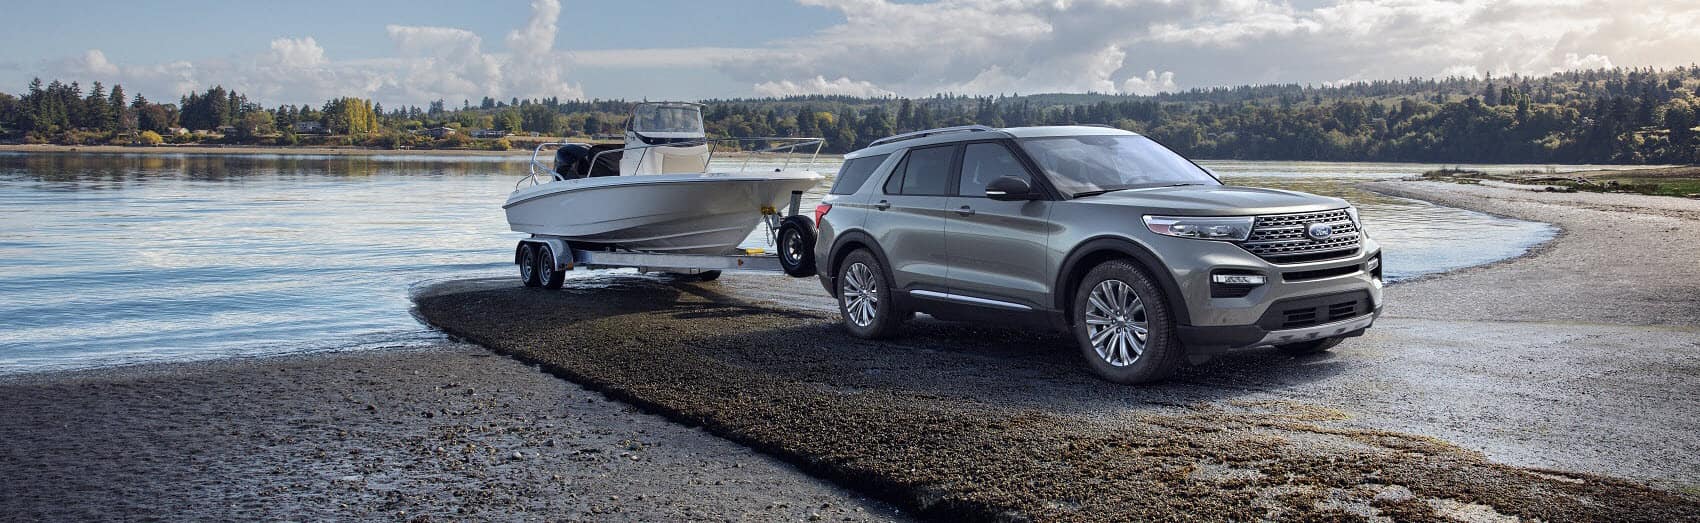 Ford Explorer Towing Power